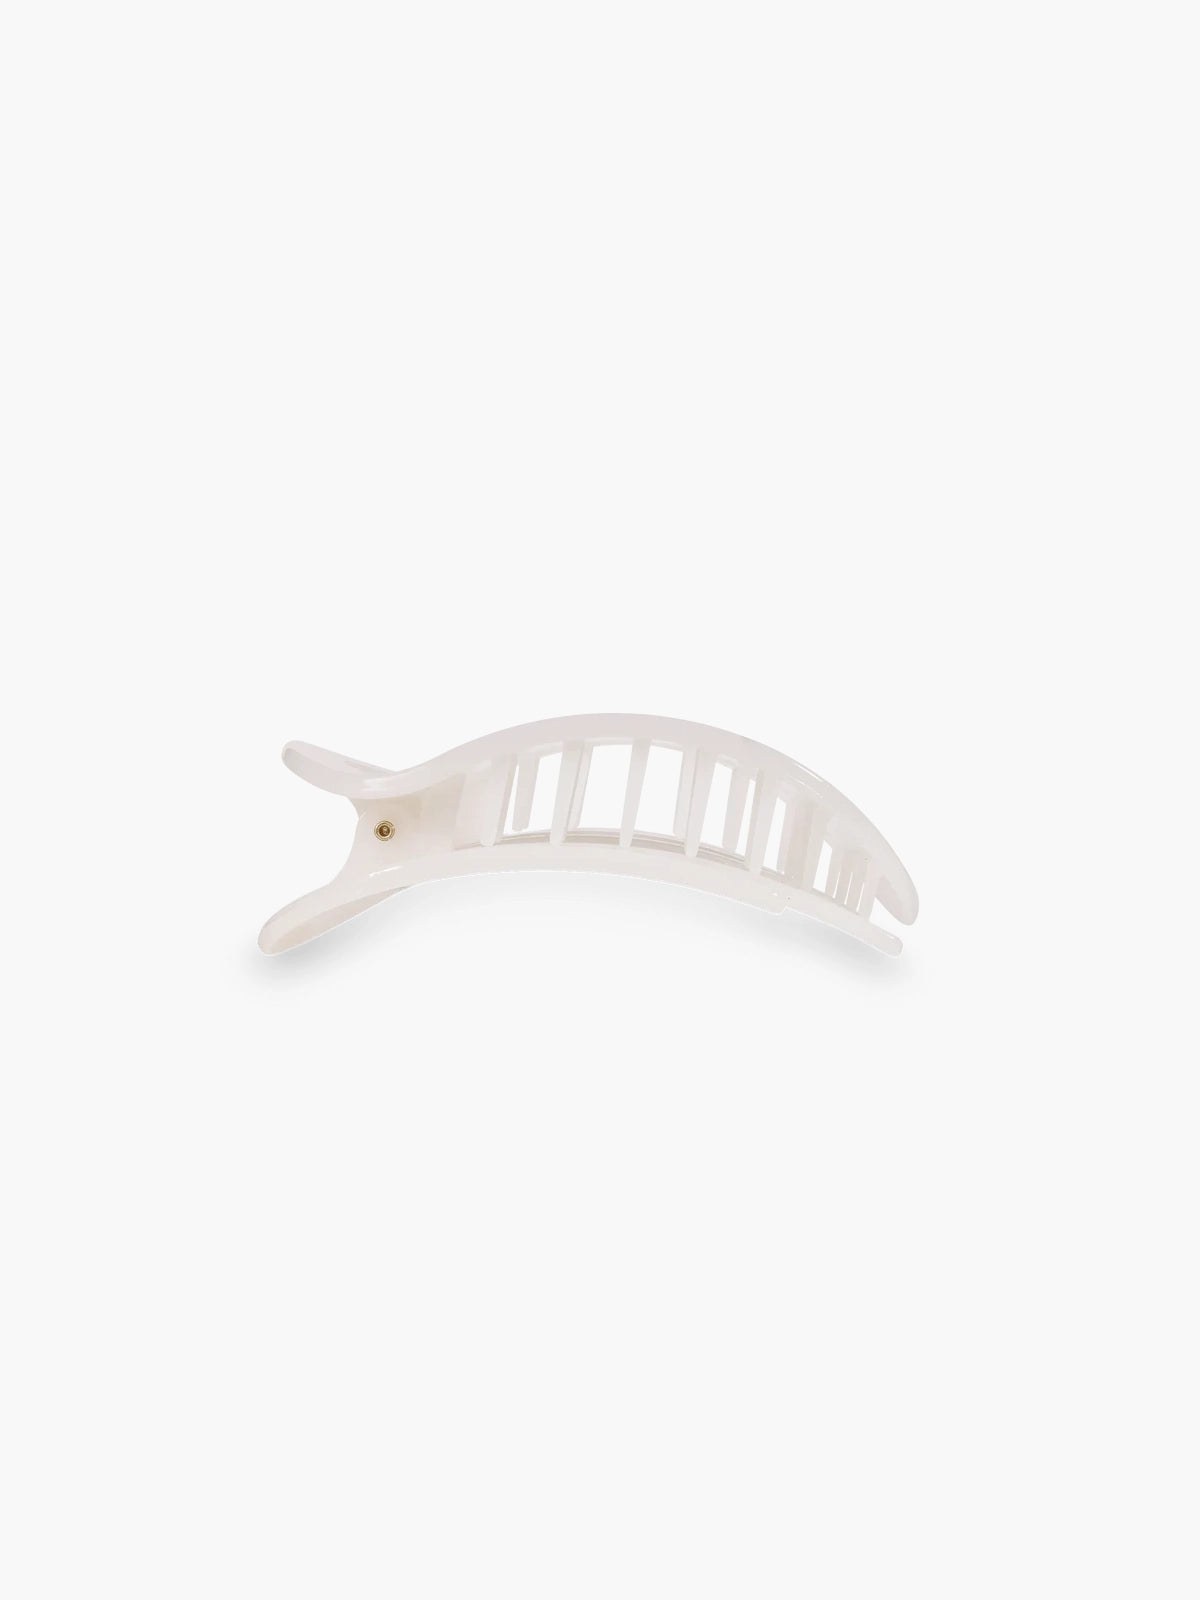 teleties small flat round hair clip in coconut white